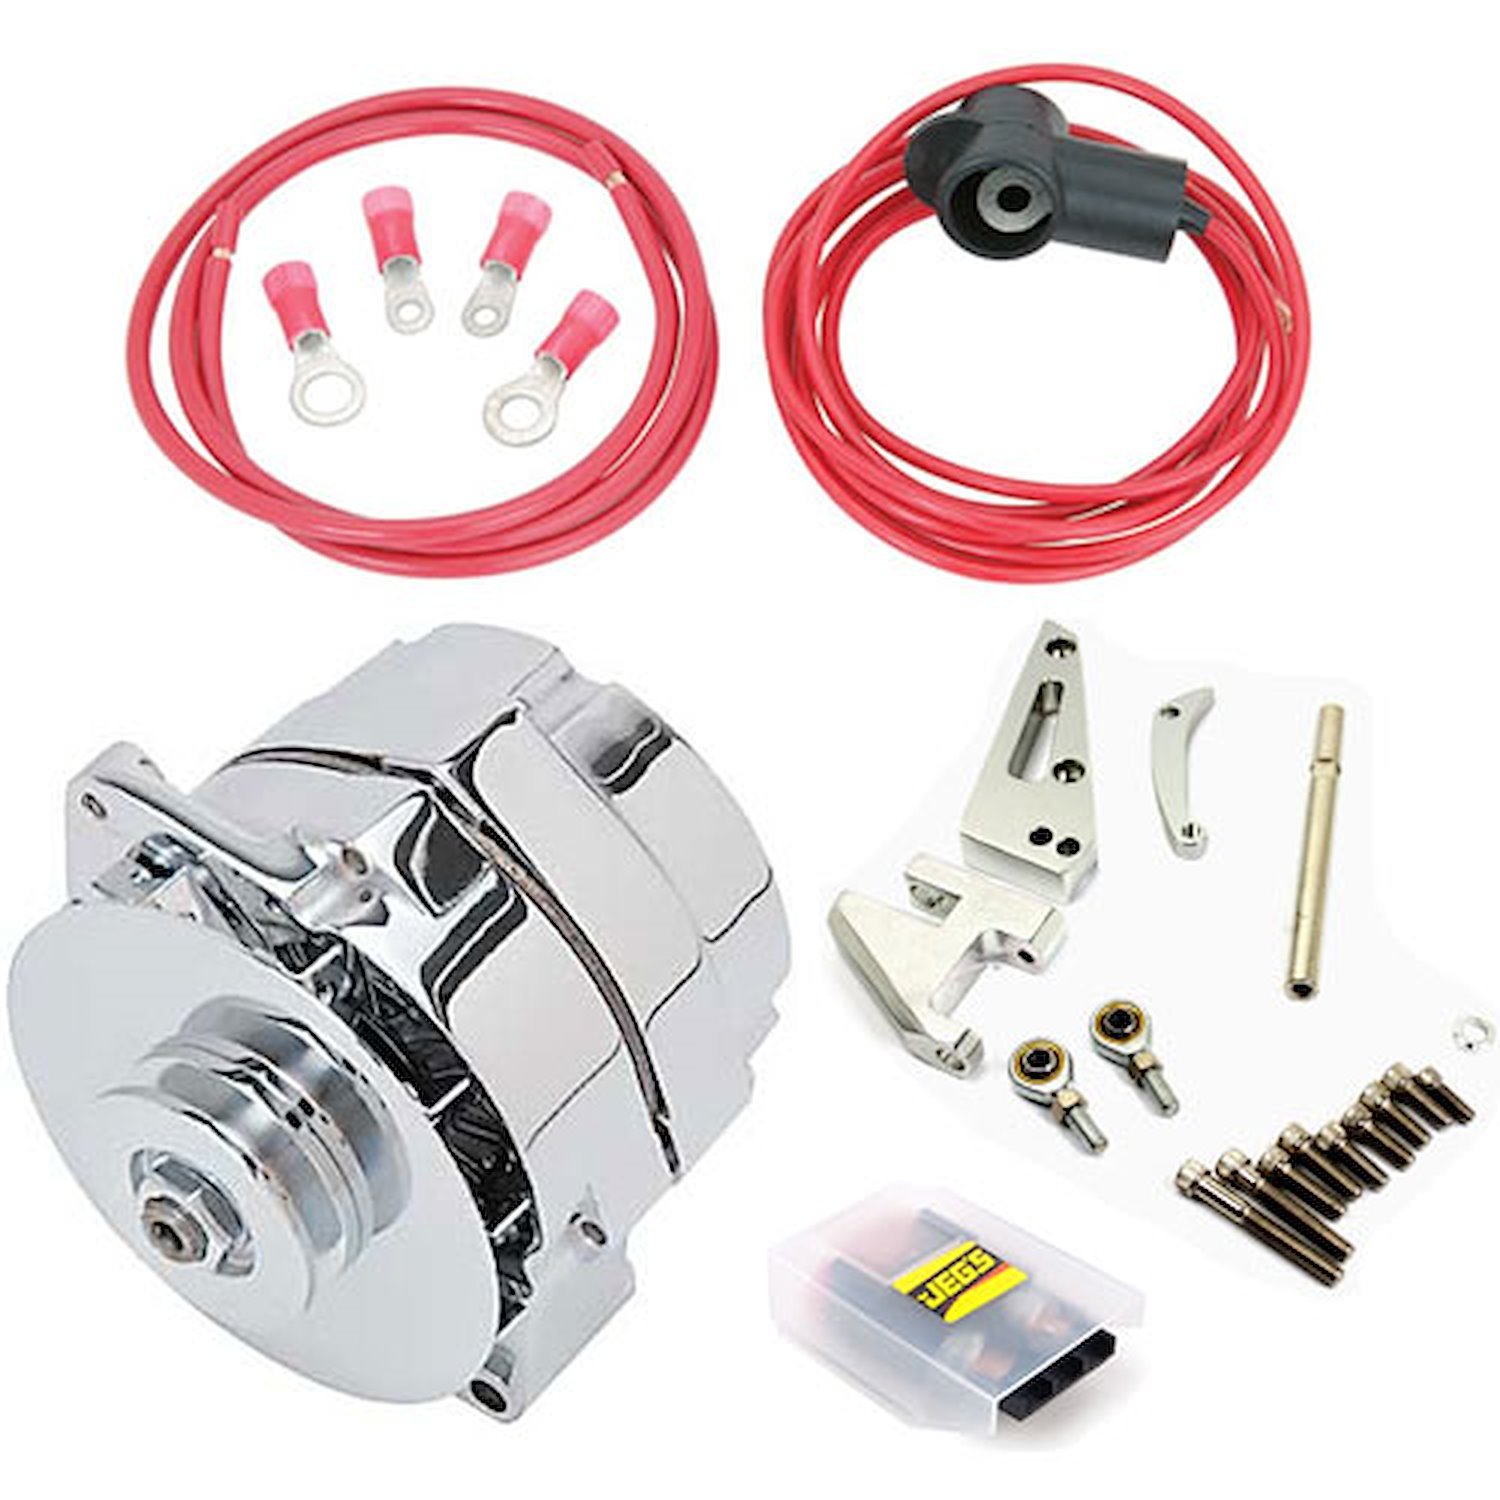 100 AMP Alternator Kit Small Block Chevy With Short Water Pump Includes: